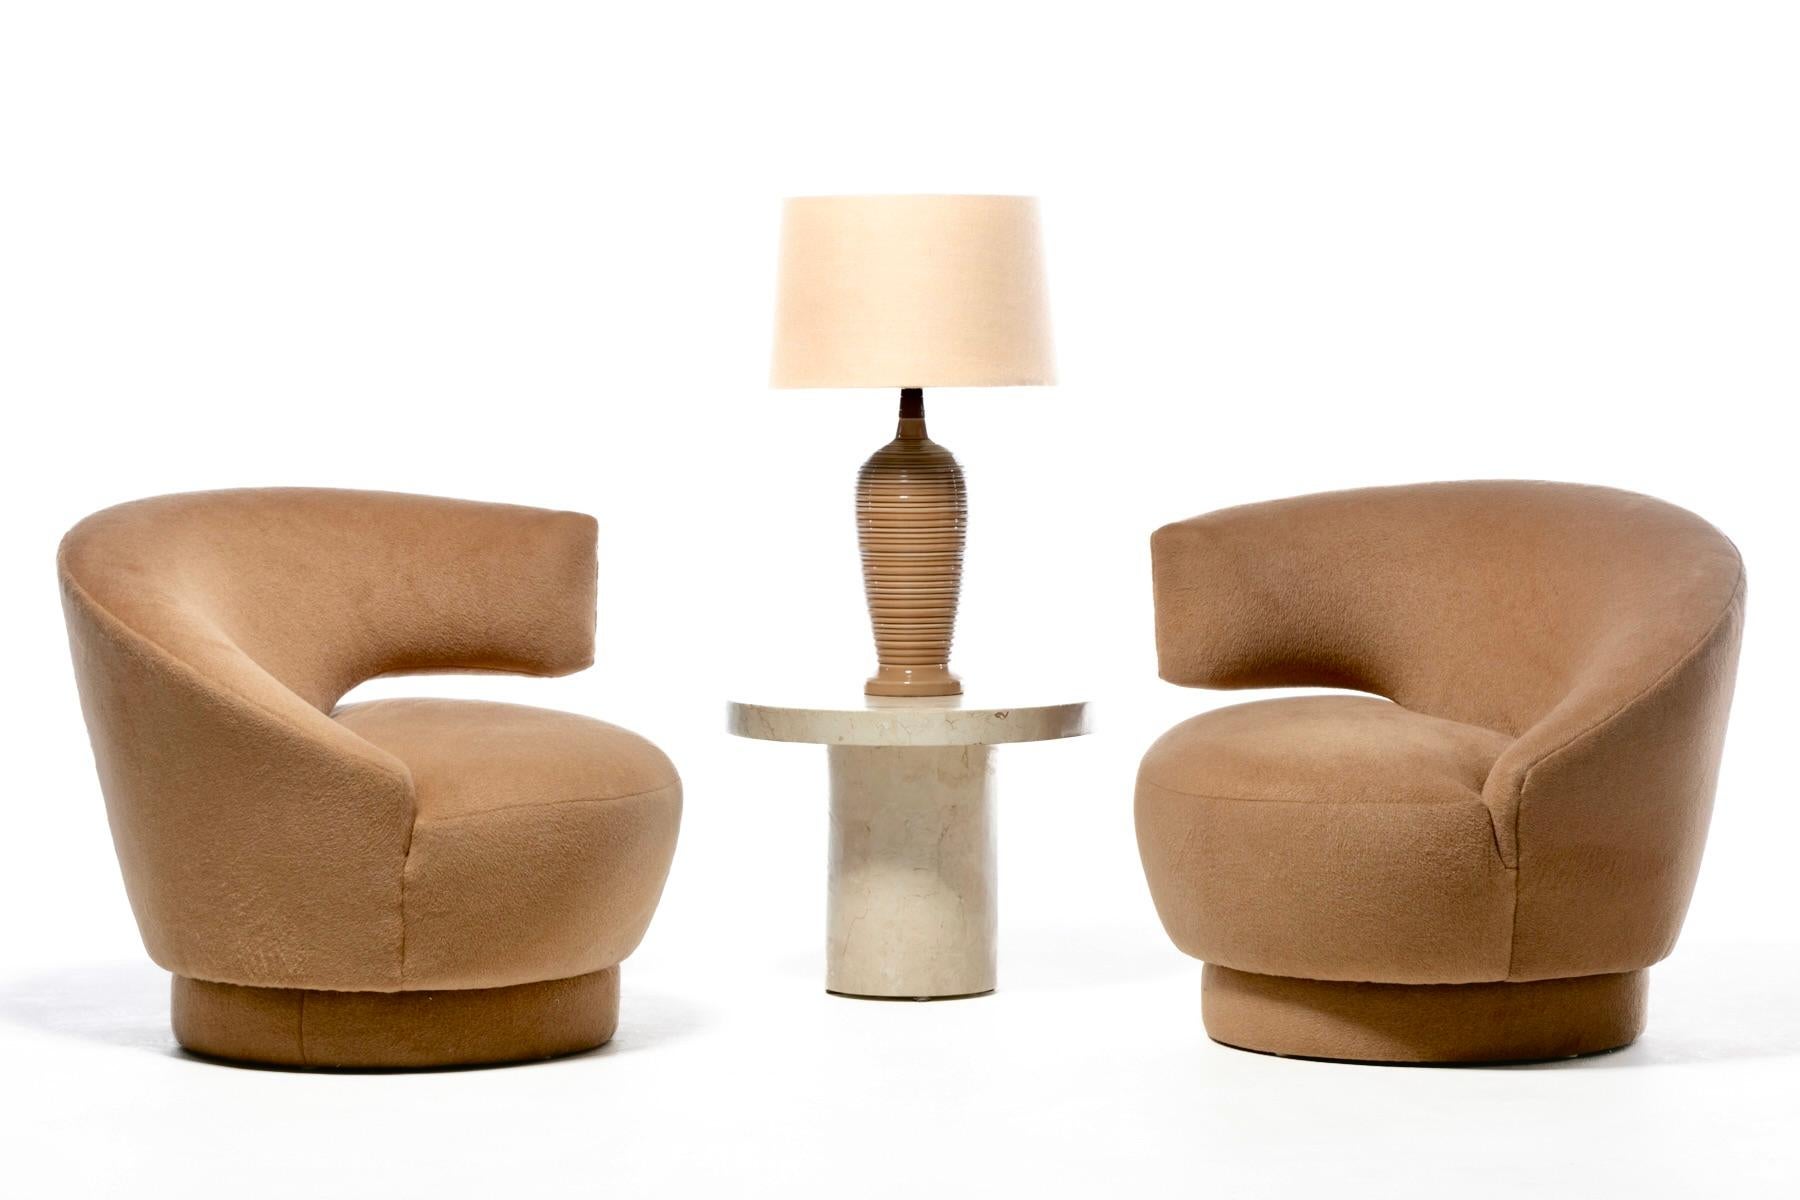 Post-Modern Vladimir Kagan Caterpillar Chairs Newly Upholstered in Camel Color Mohair For Sale